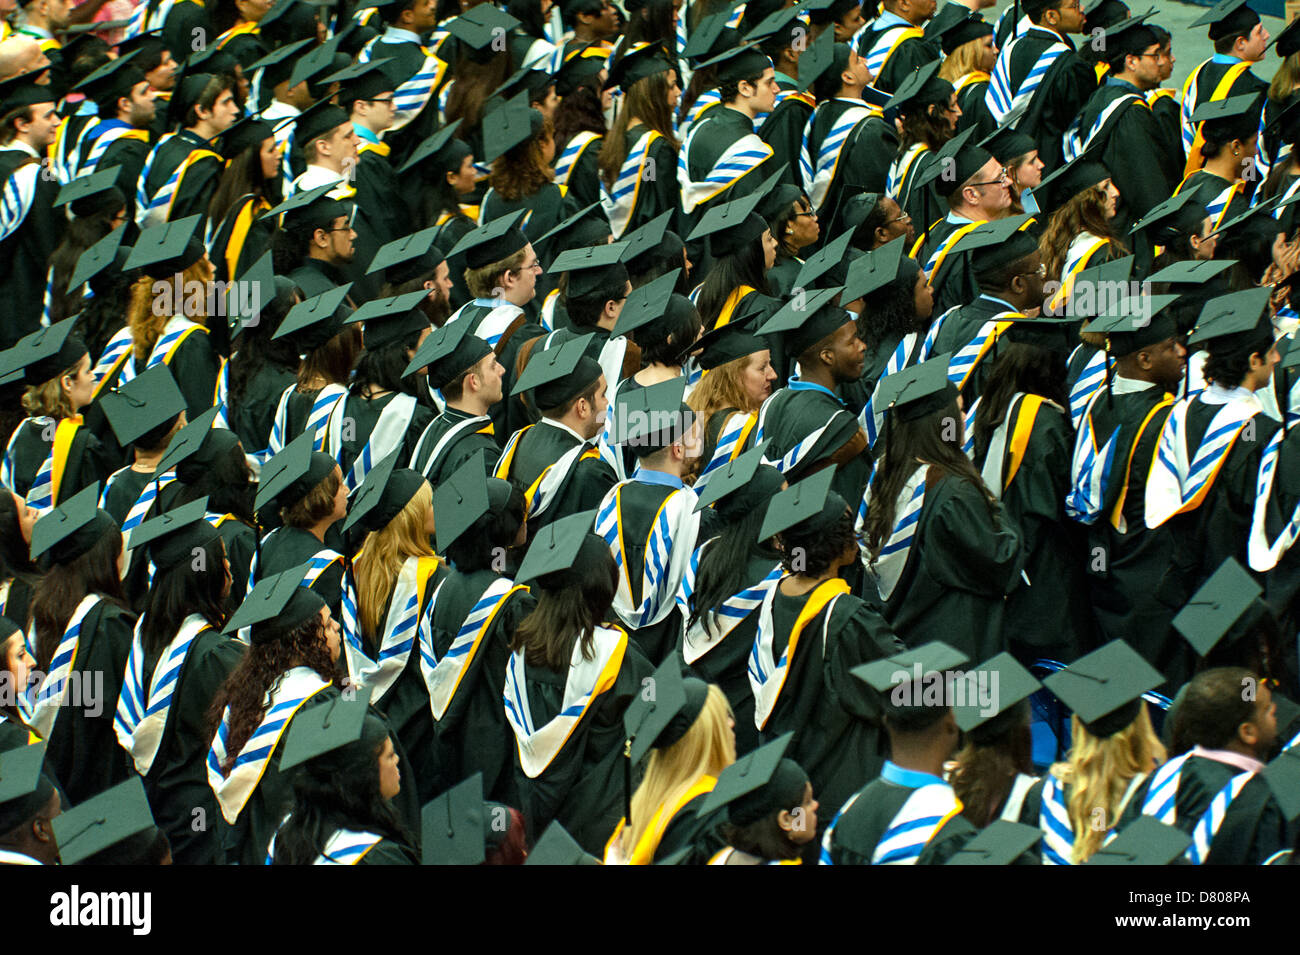 A graduation ceremony at a Mercy College New York Stock Photo